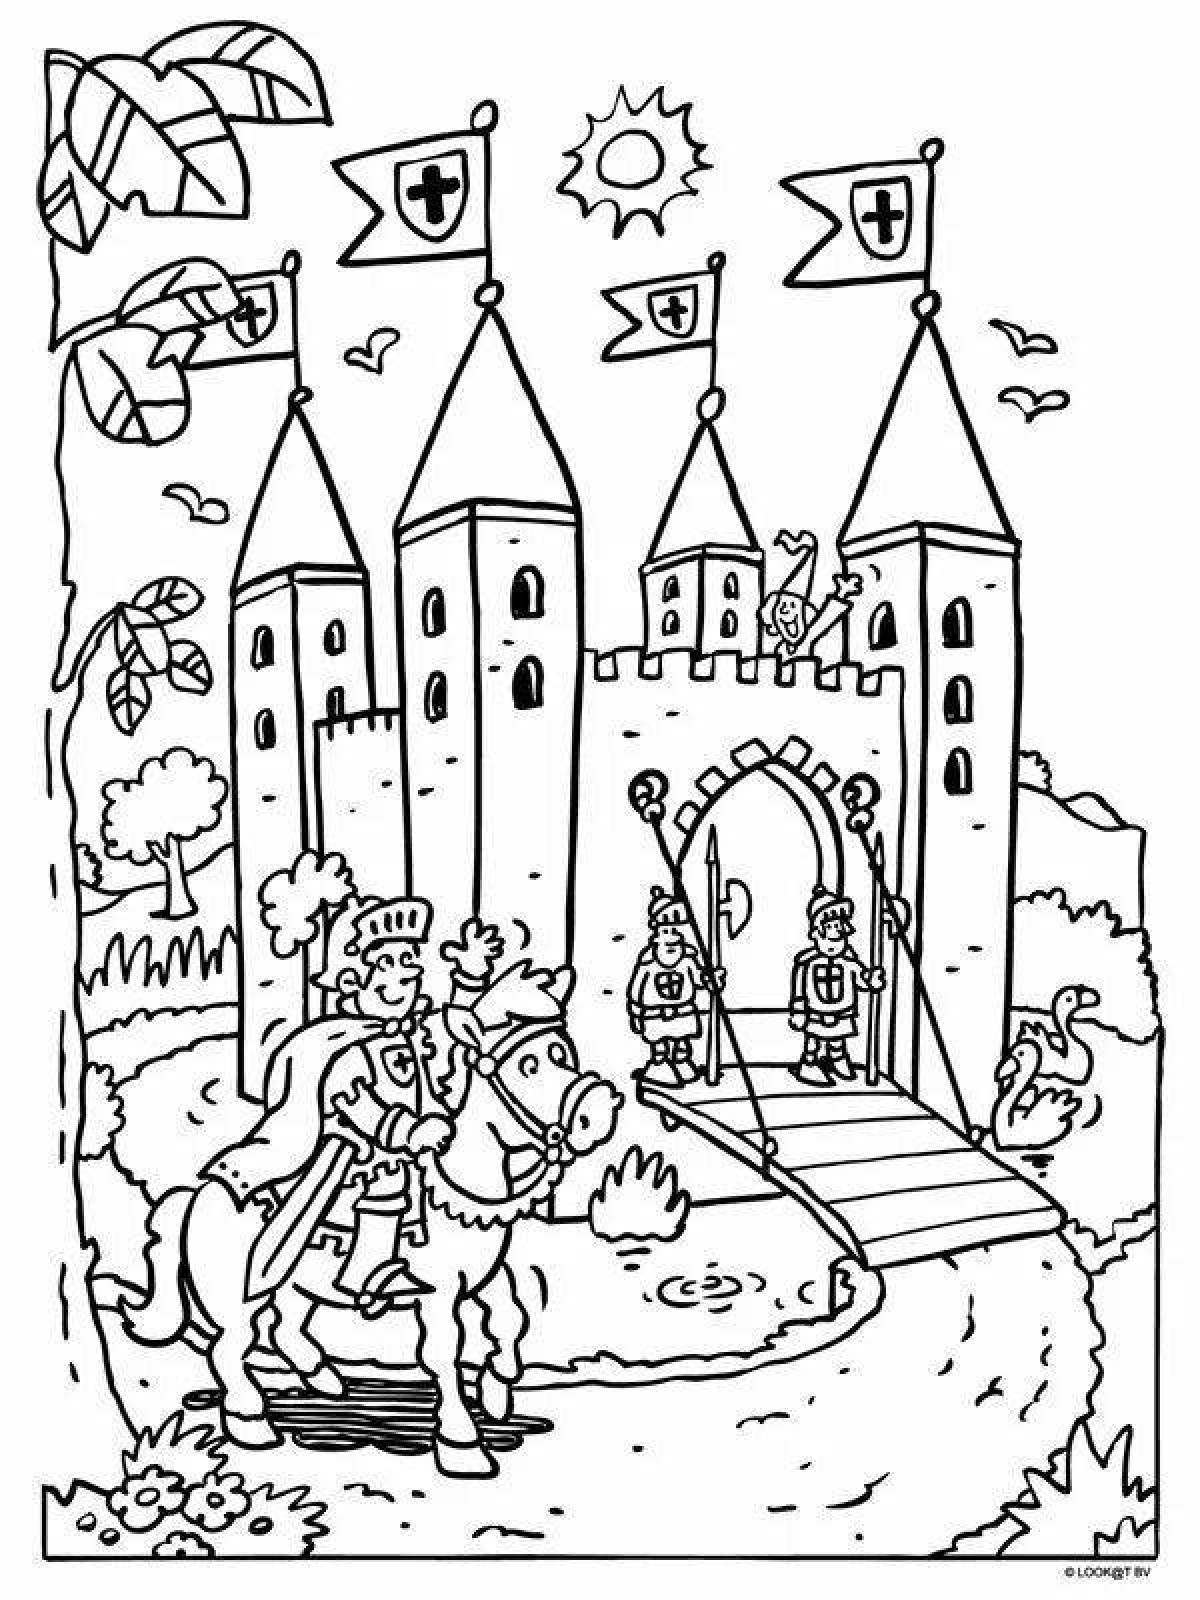 Luxury knight's castle coloring book